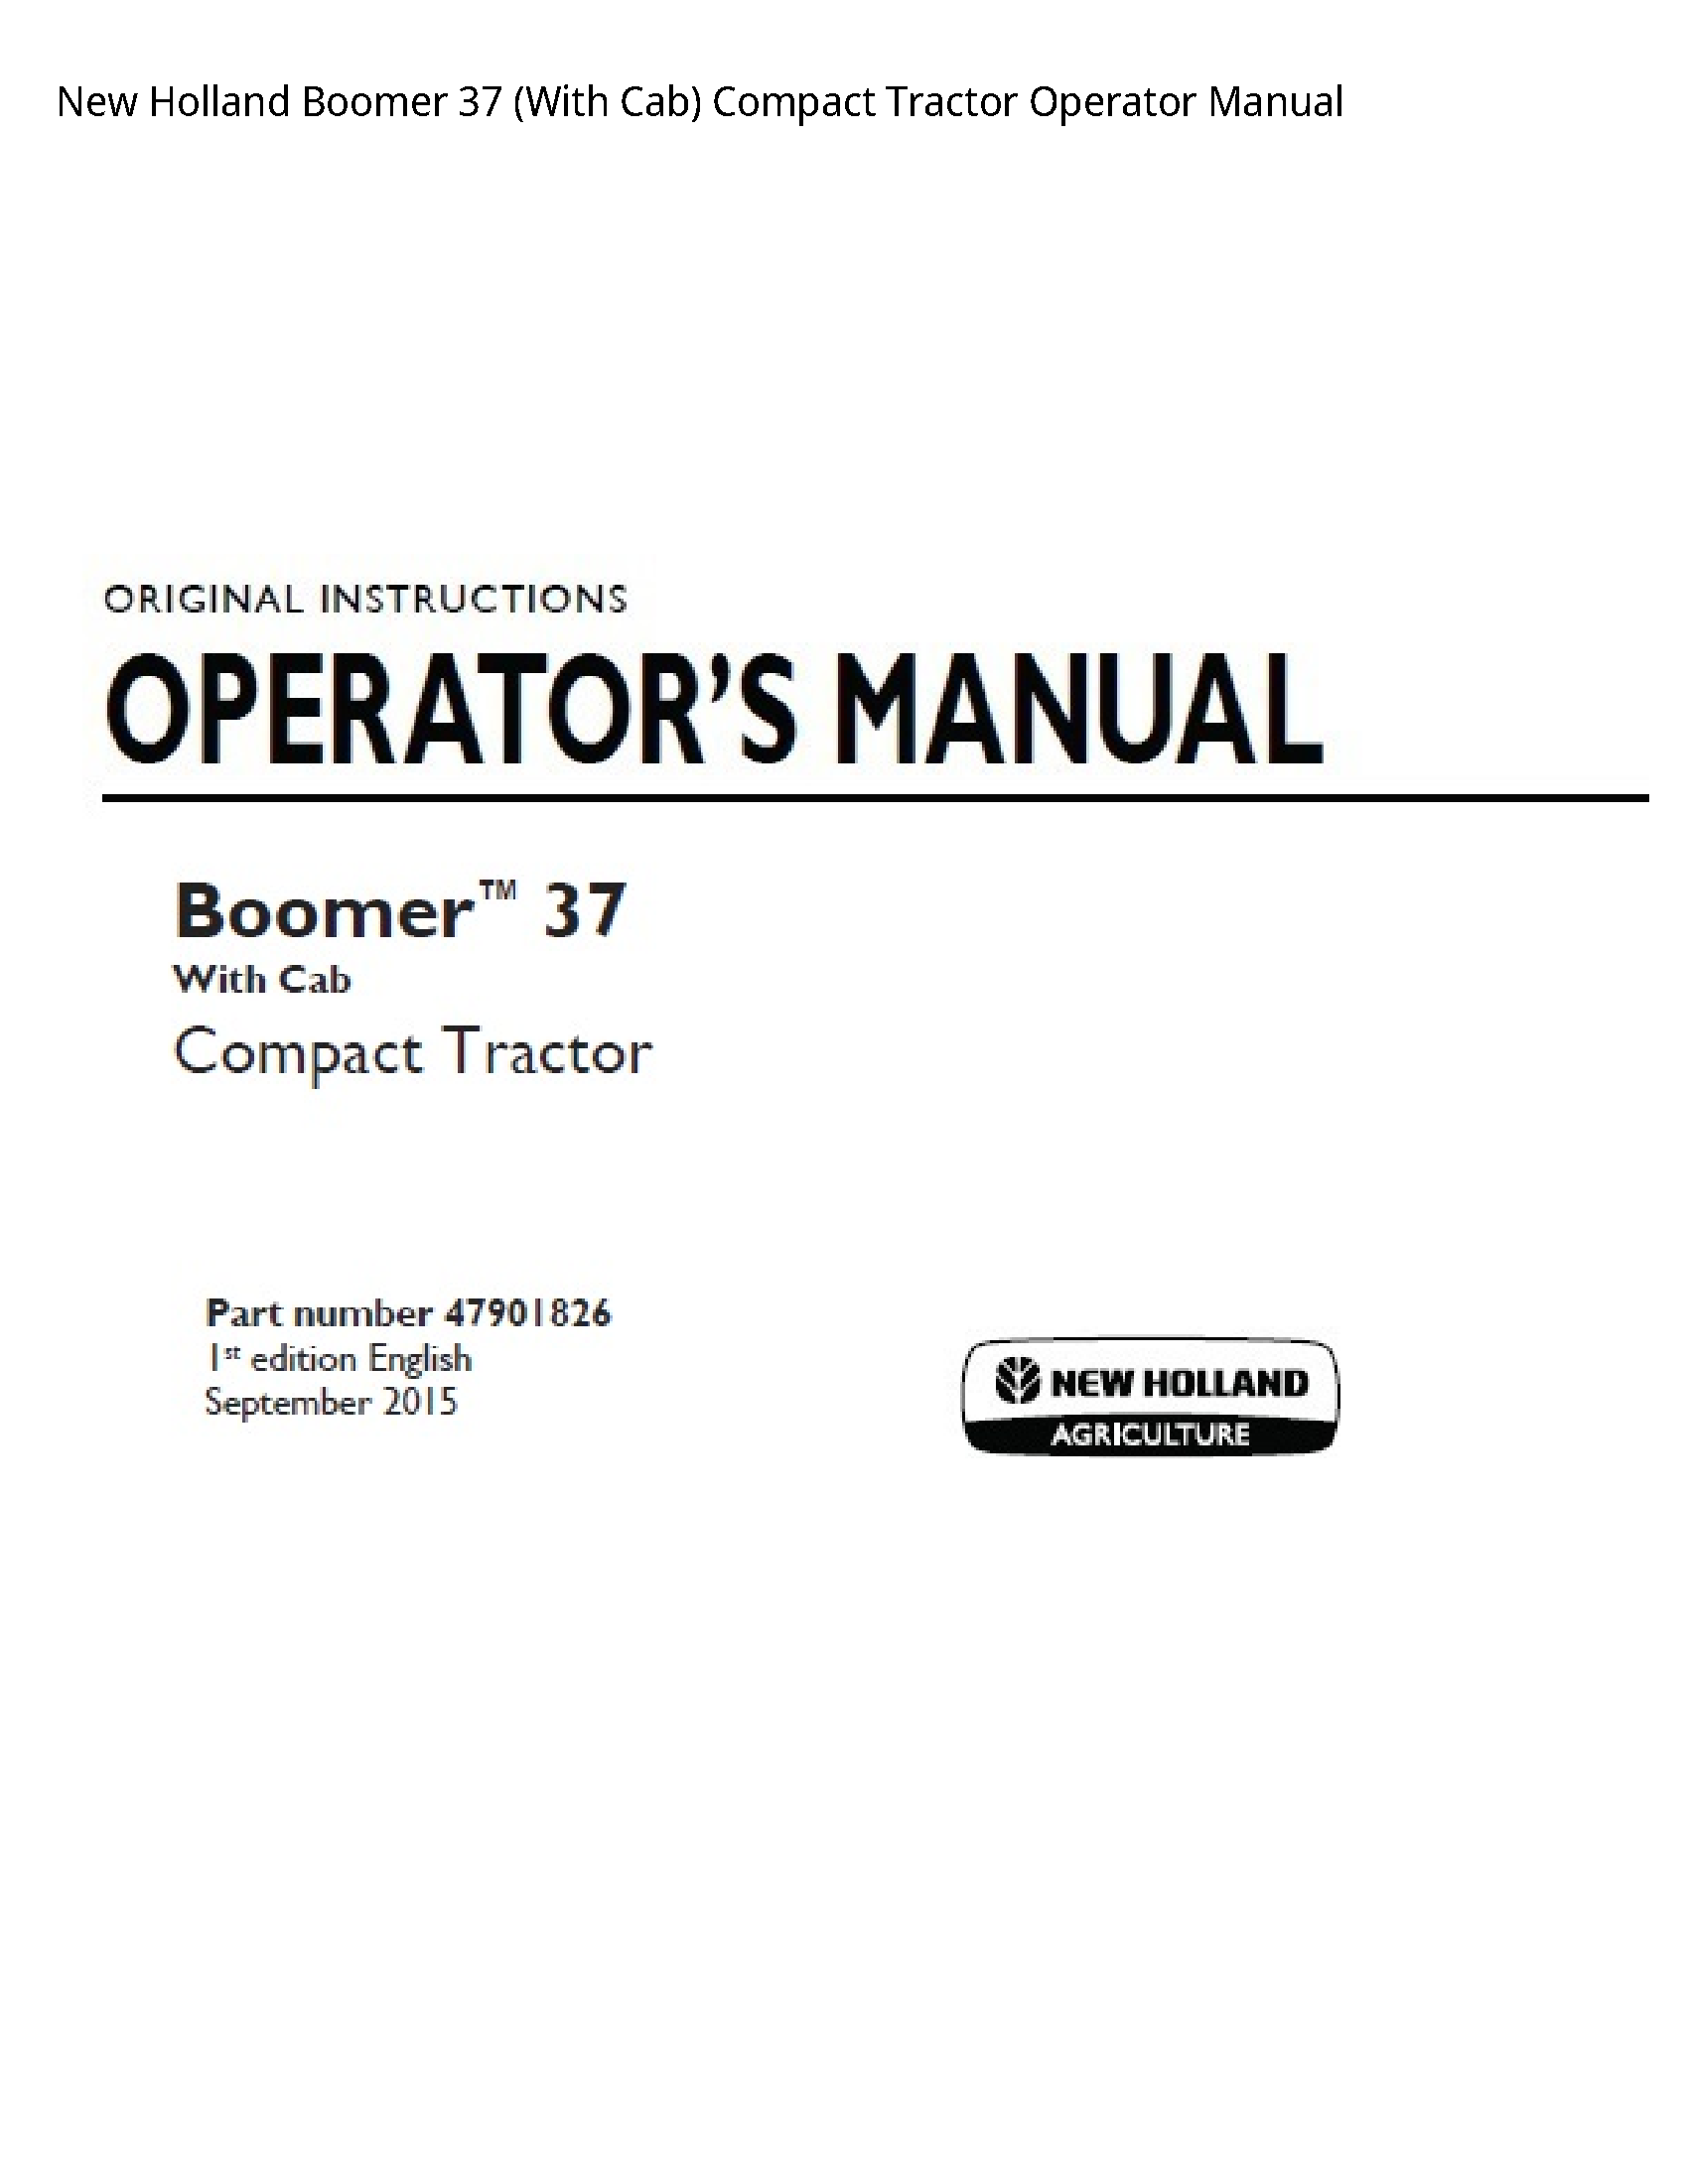 New Holland 37 Boomer (With Cab) Compact Tractor Operator manual